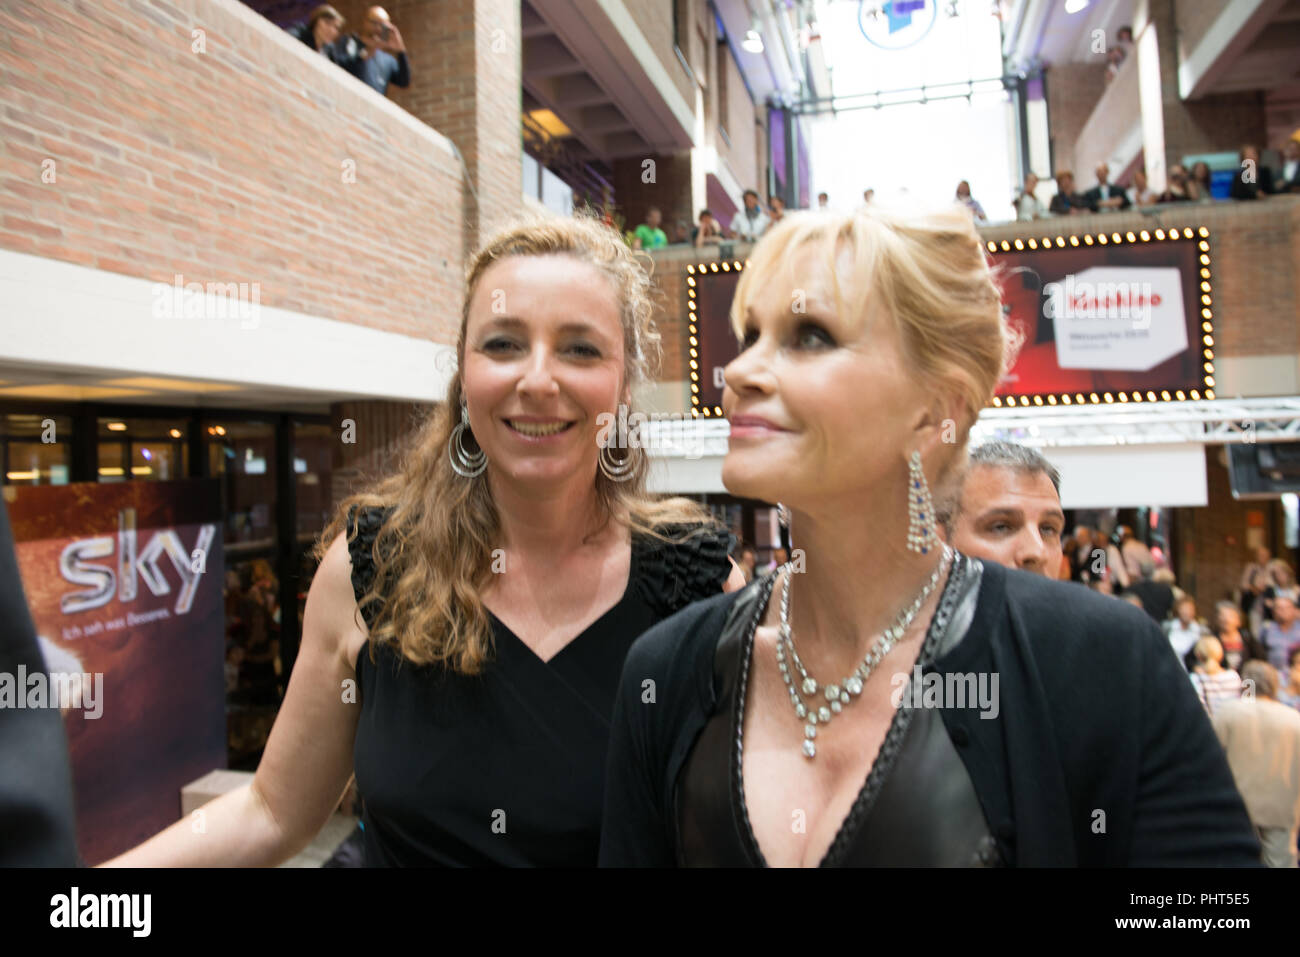 Actress Melanie Griffith arrives at Filmfest München 2012 together with Festival Director Diana Iljine Stock Photo